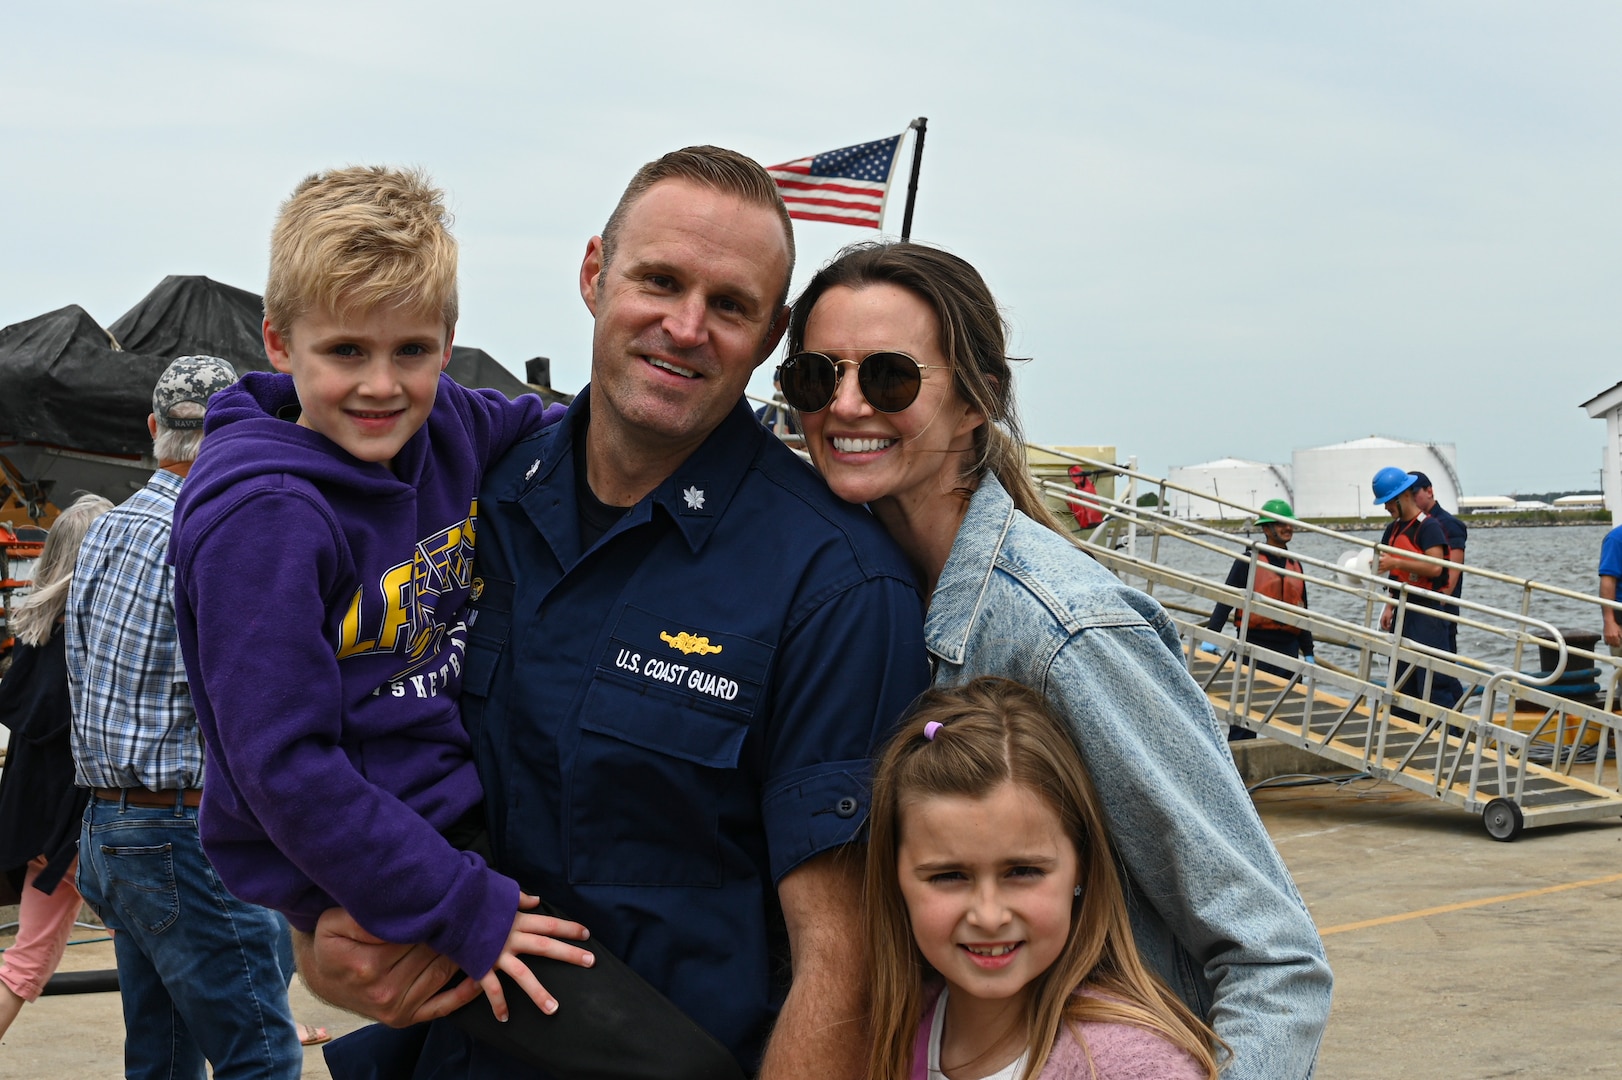 U.S. Coast Guard Cmdr. Sky Holm, the commanding officer of USCGC Tampa (WMEC 902), poses for a photo with his family at the cutter's return to home port in Portsmouth, Virginia, April 26, 2023. Tampa returned home following an 88-day patrol in the Florida Straits and Caribbean Sea. (U.S. Coast Guard photo by Petty Officer 3rd Class Kate Kilroy)